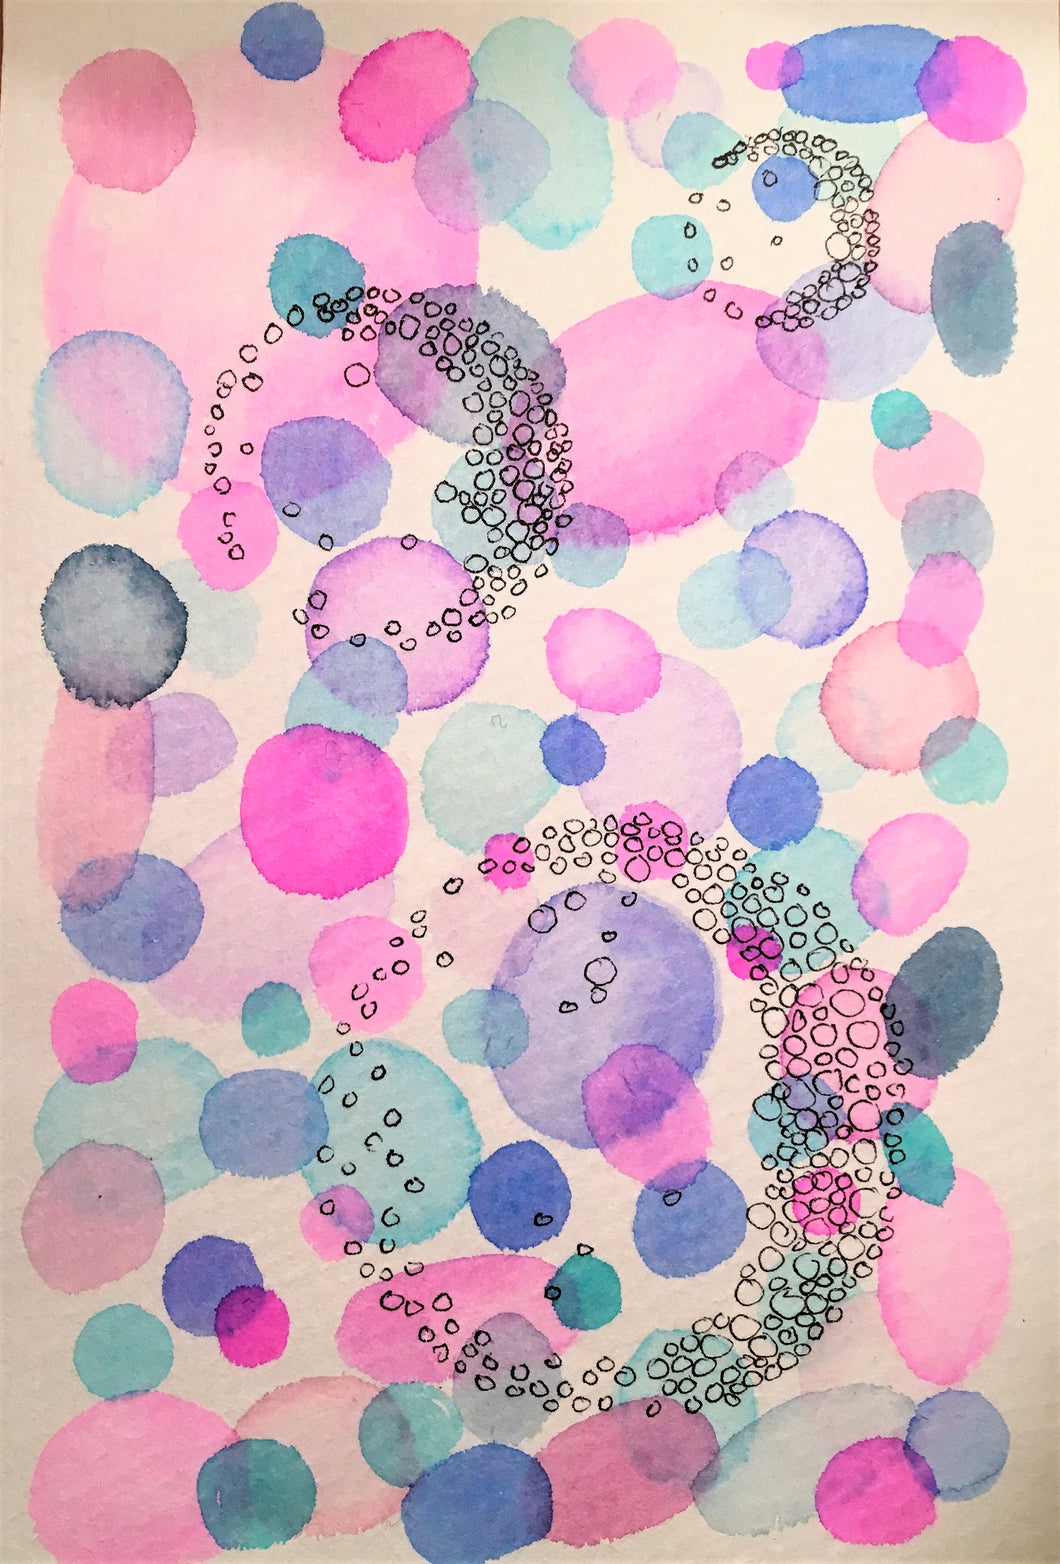 Handpainted Watercolour Greeting Card - Abstract Pink/Blue/Purple Circle with Ink Bubble Design - eDgE dEsiGn London